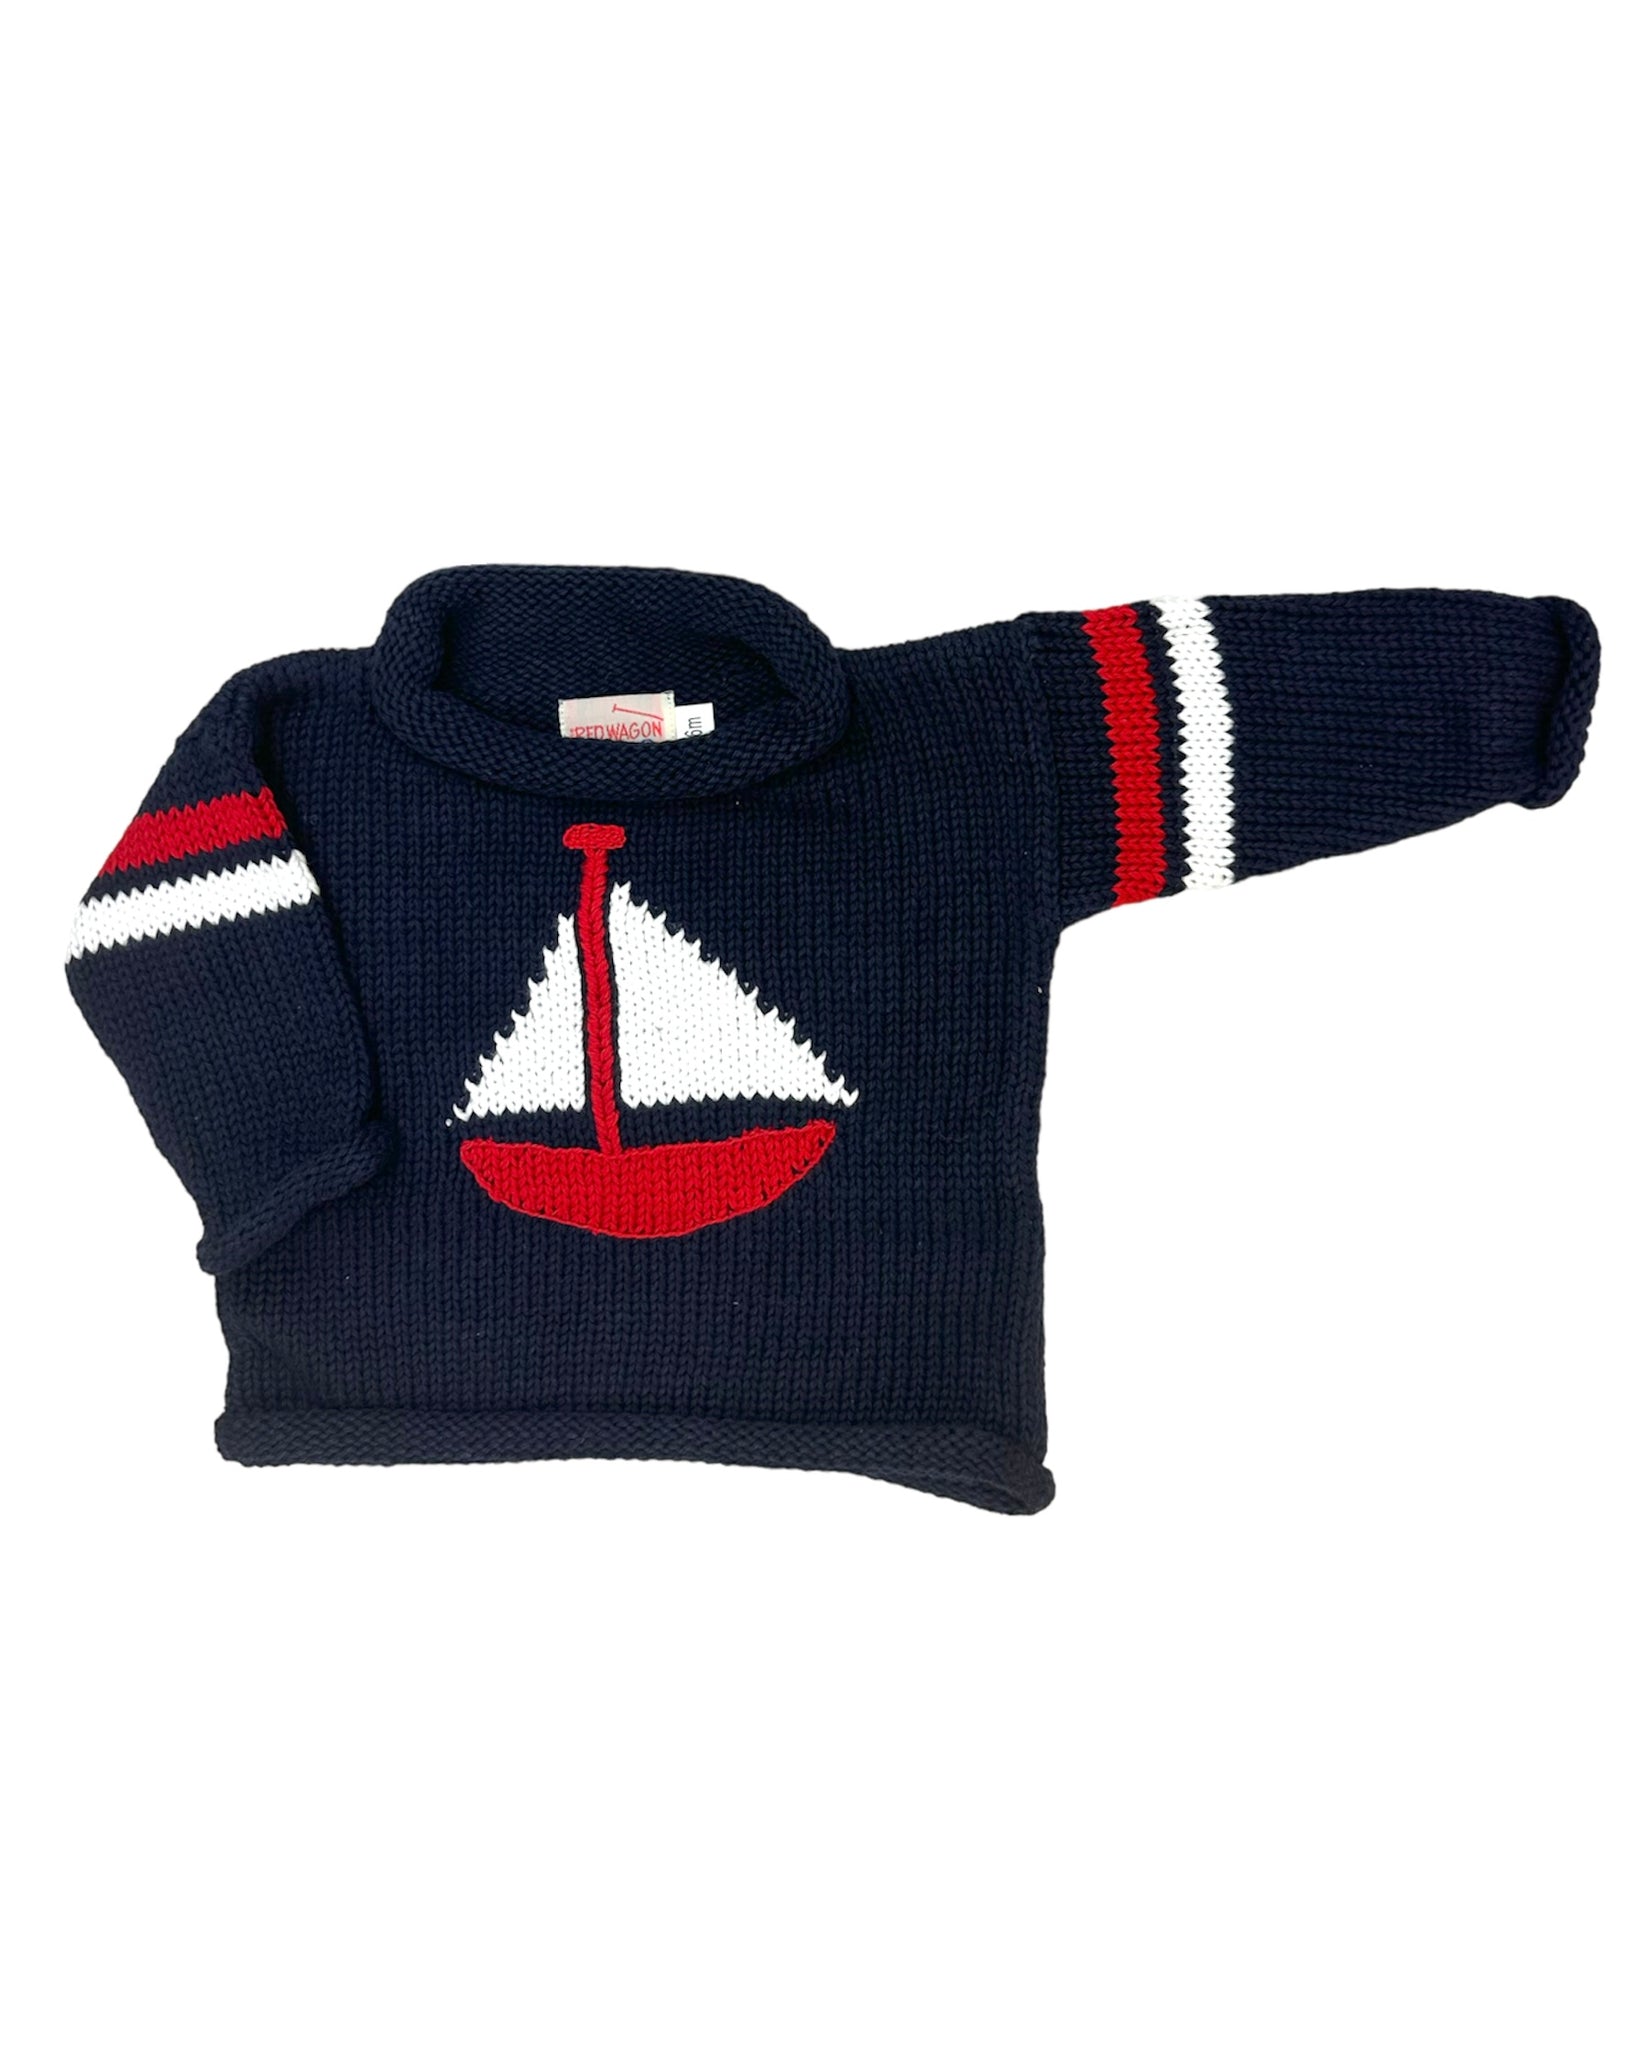 navy long sleeve sweater with red and white sailboat, 2 red and white stripes on each sleeve